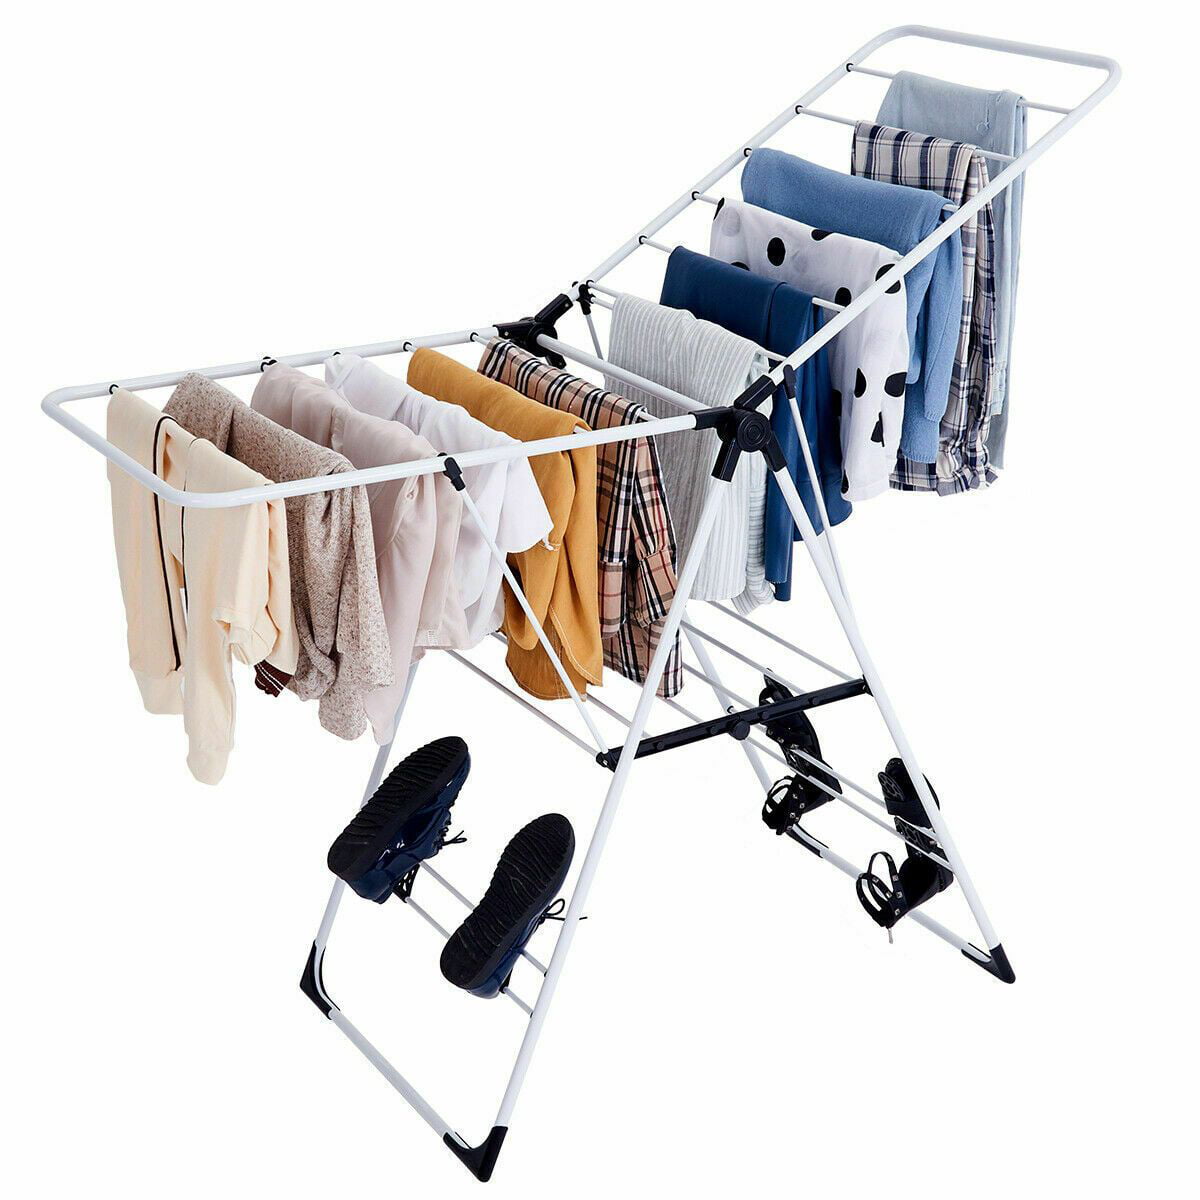 Sunbeam NEW Folding Foldable Collapsible Clothes Drying Laundry Rack CD45060 